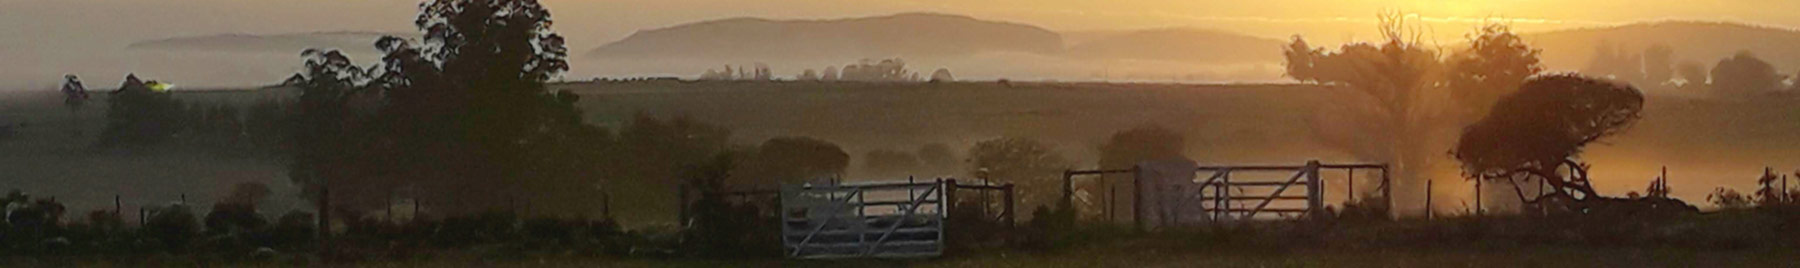 fence and rolling hills in a golden sunset